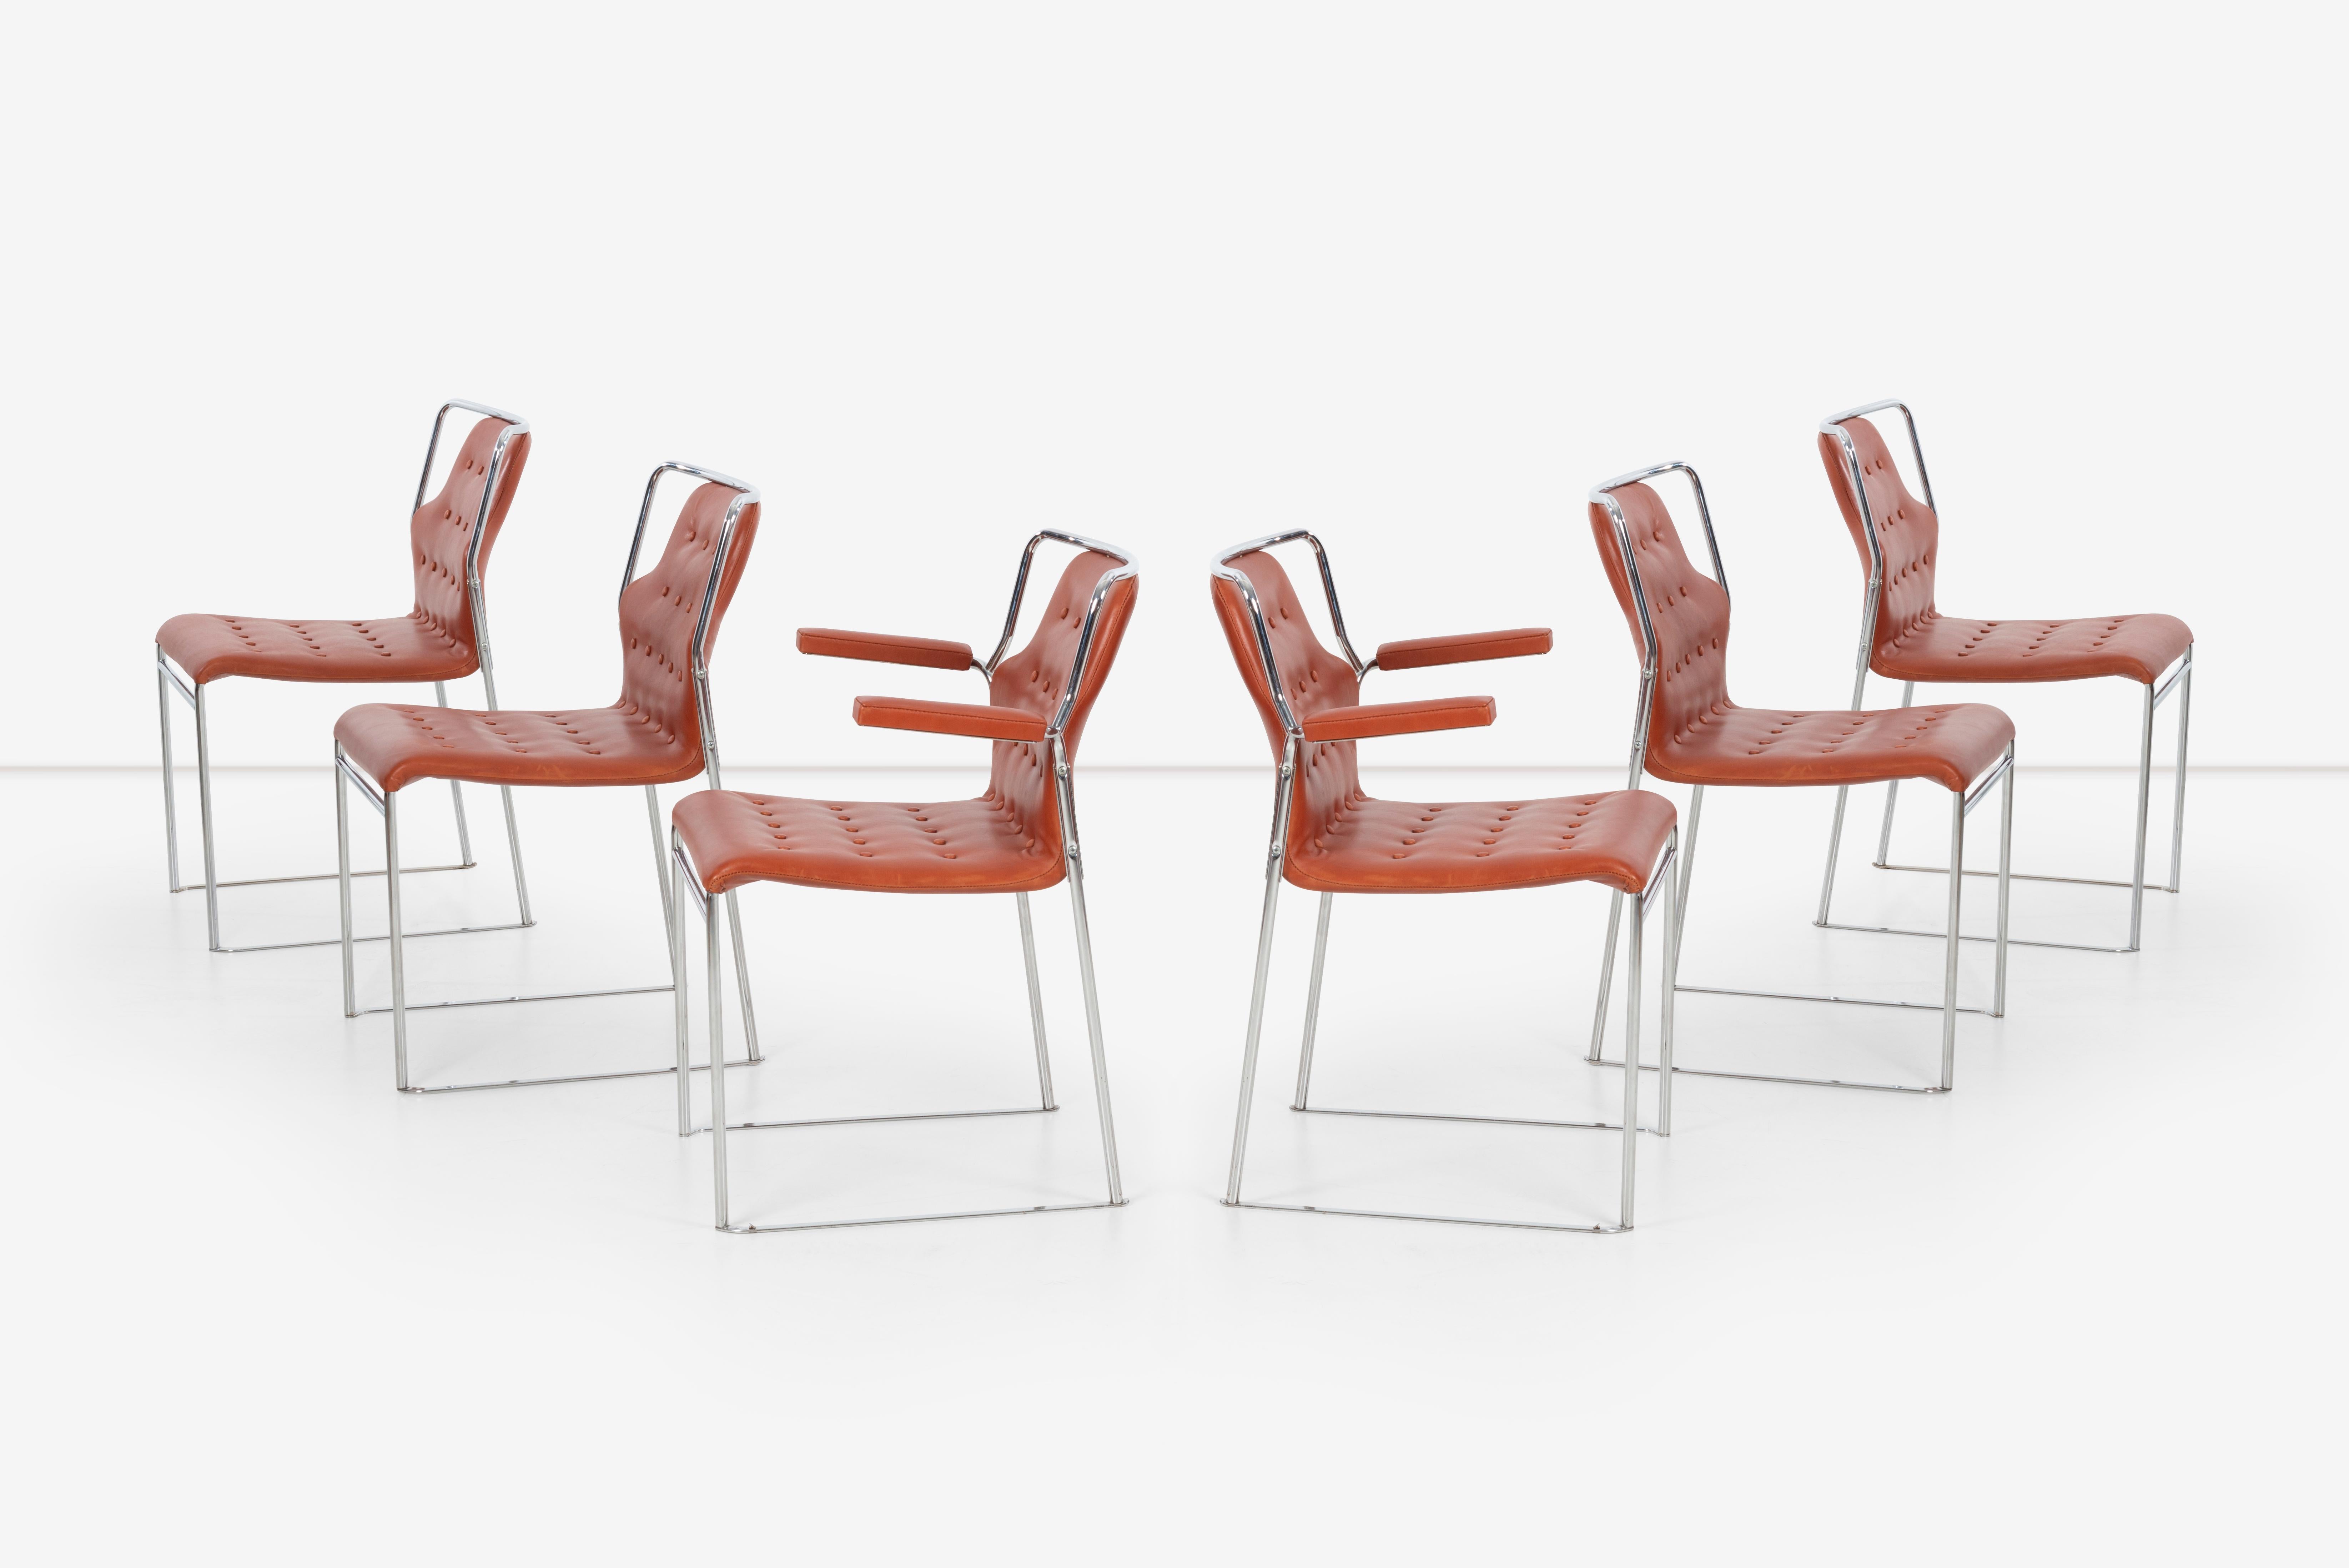 Set of 6 dining chairs upholstered with Edlemen leather and chrome plated frame. Arm chairs have a width of 24.5